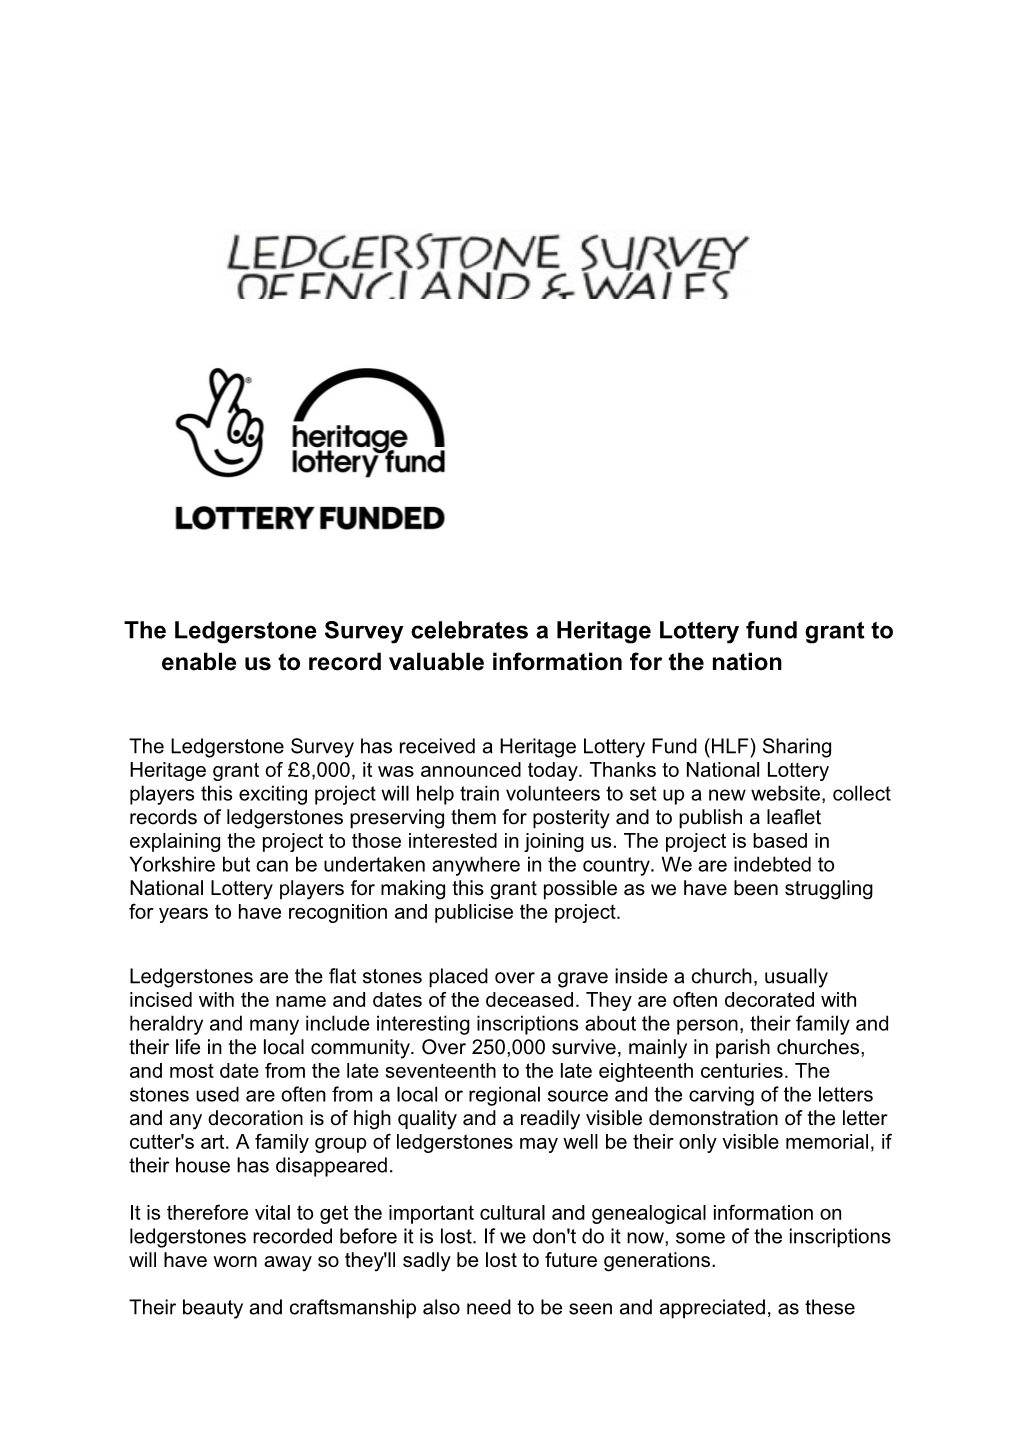 The Ledgerstone Survey Celebrates a Heritage Lottery Fund Grant to Enable Us to Record